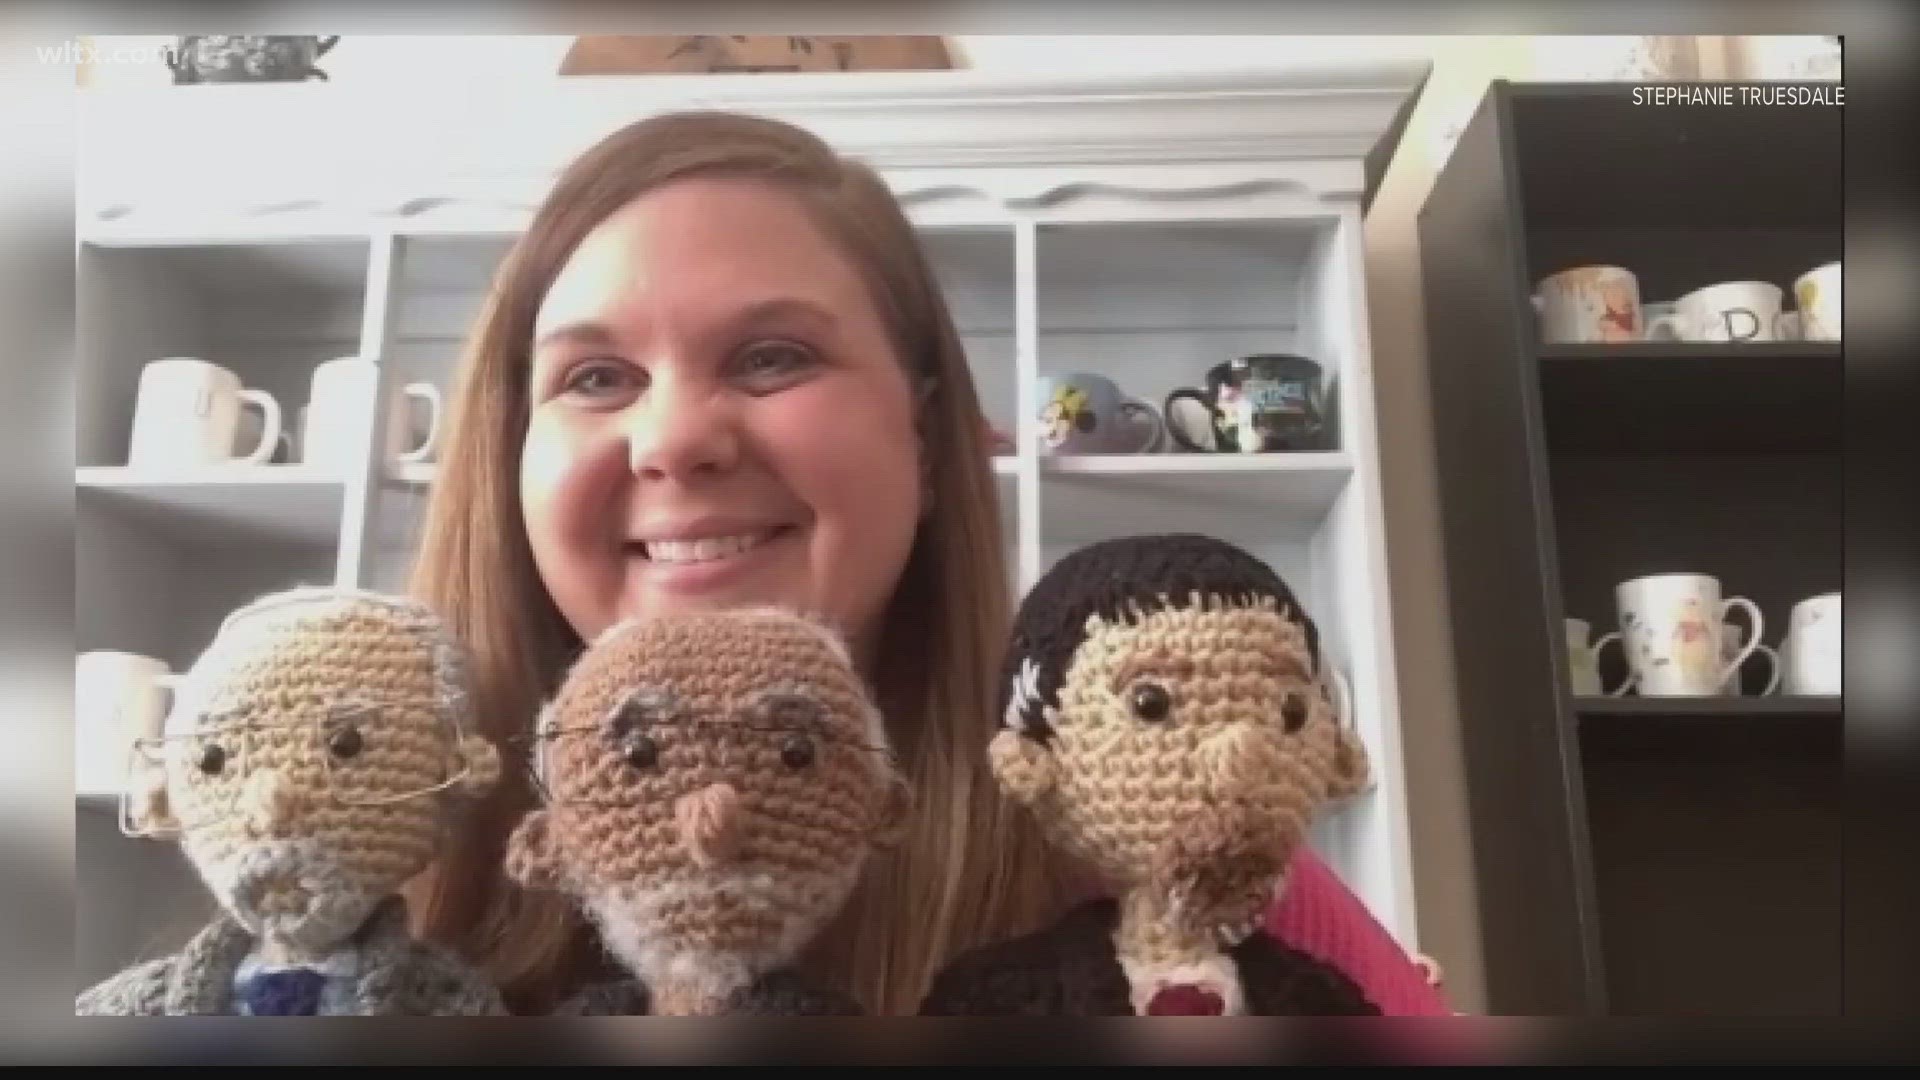 A woman has used needled and yarn to create versions of some of the key figures in the Alex Murdaugh murder trial.